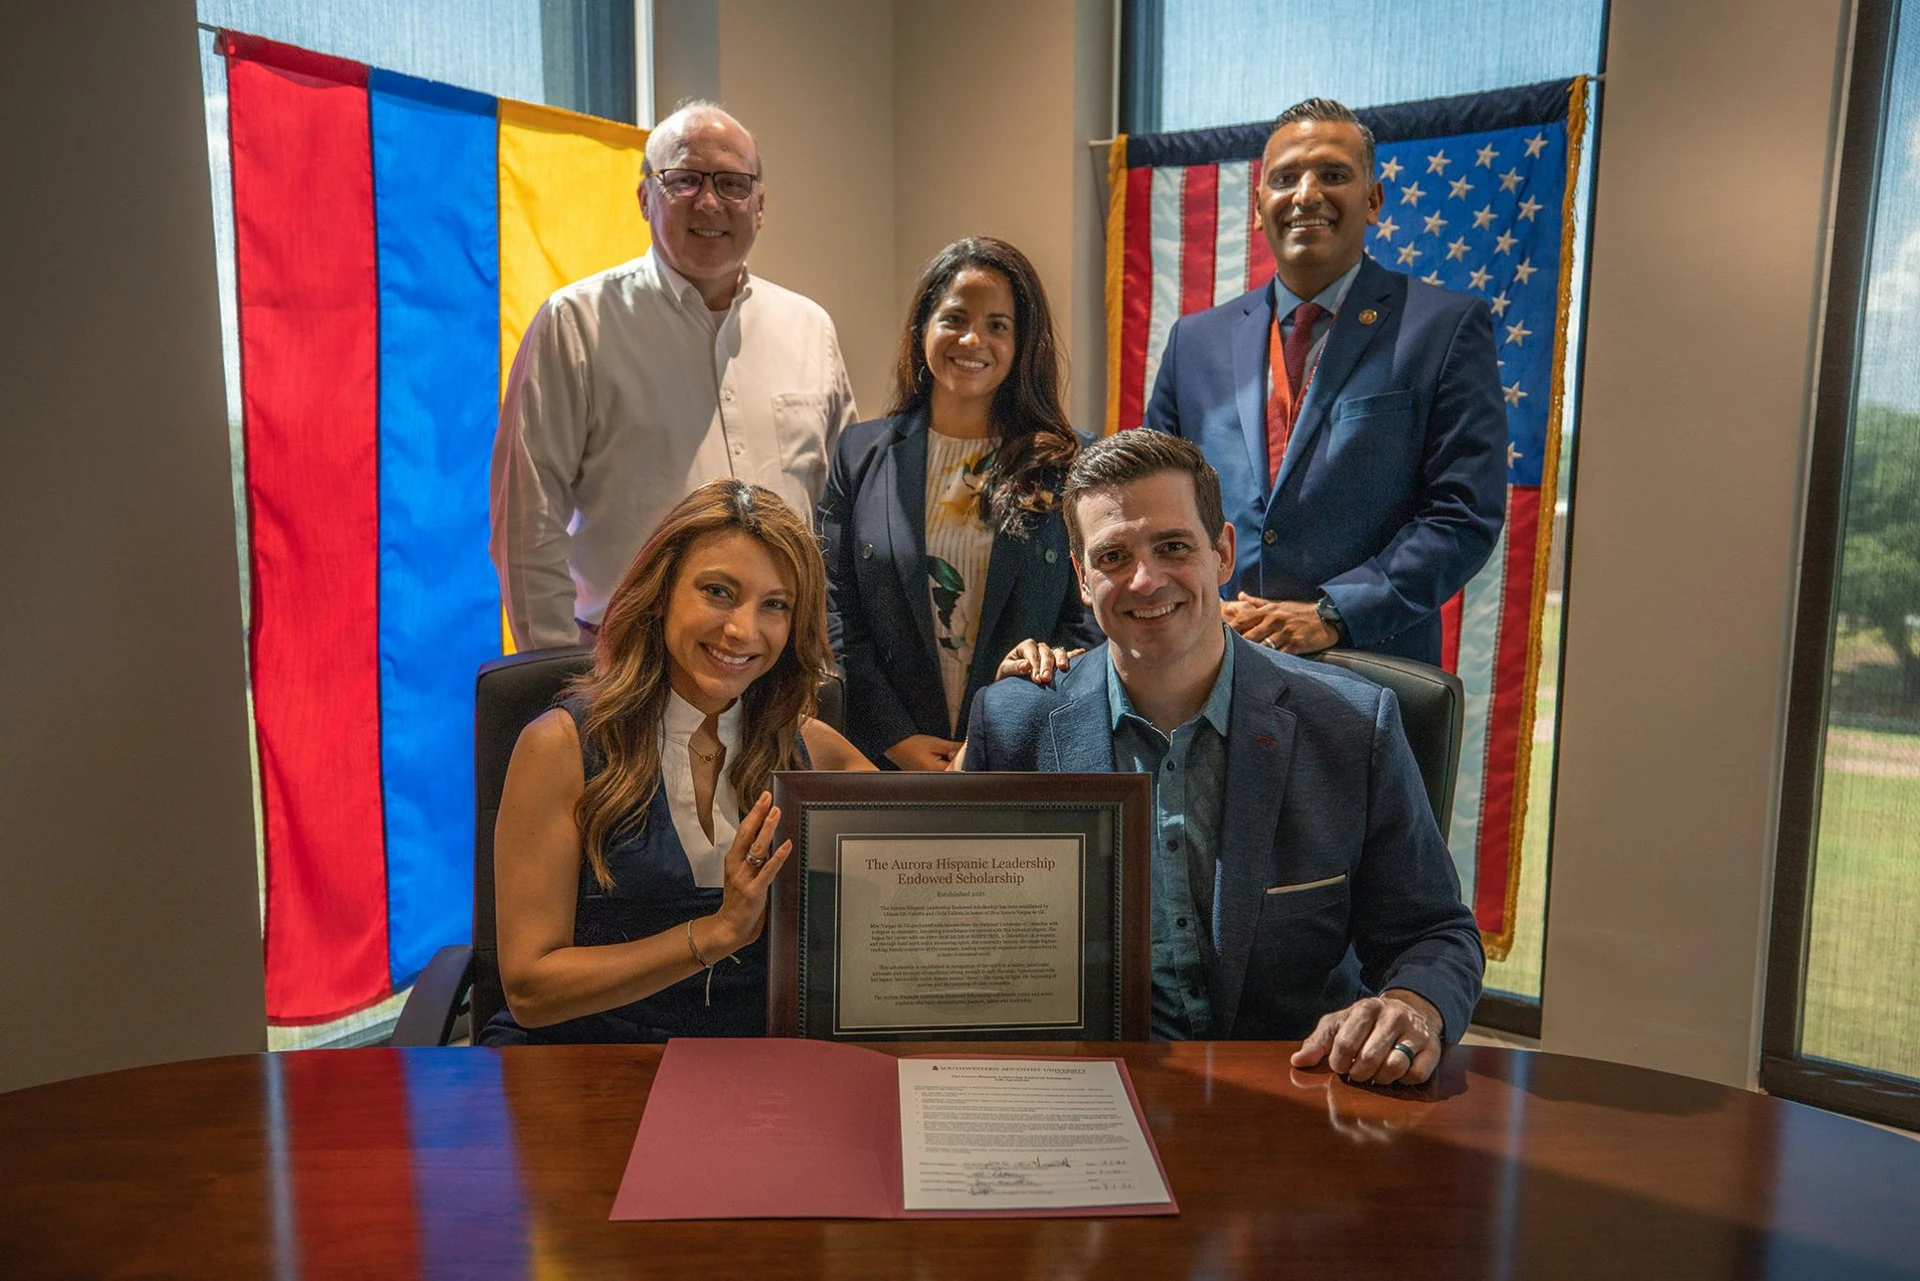 The Vallettas pose holding up a frame with Joel Wallace, Ana Patterson, and Tony Reyes standing behind them with the Columbian and American flags behind them.